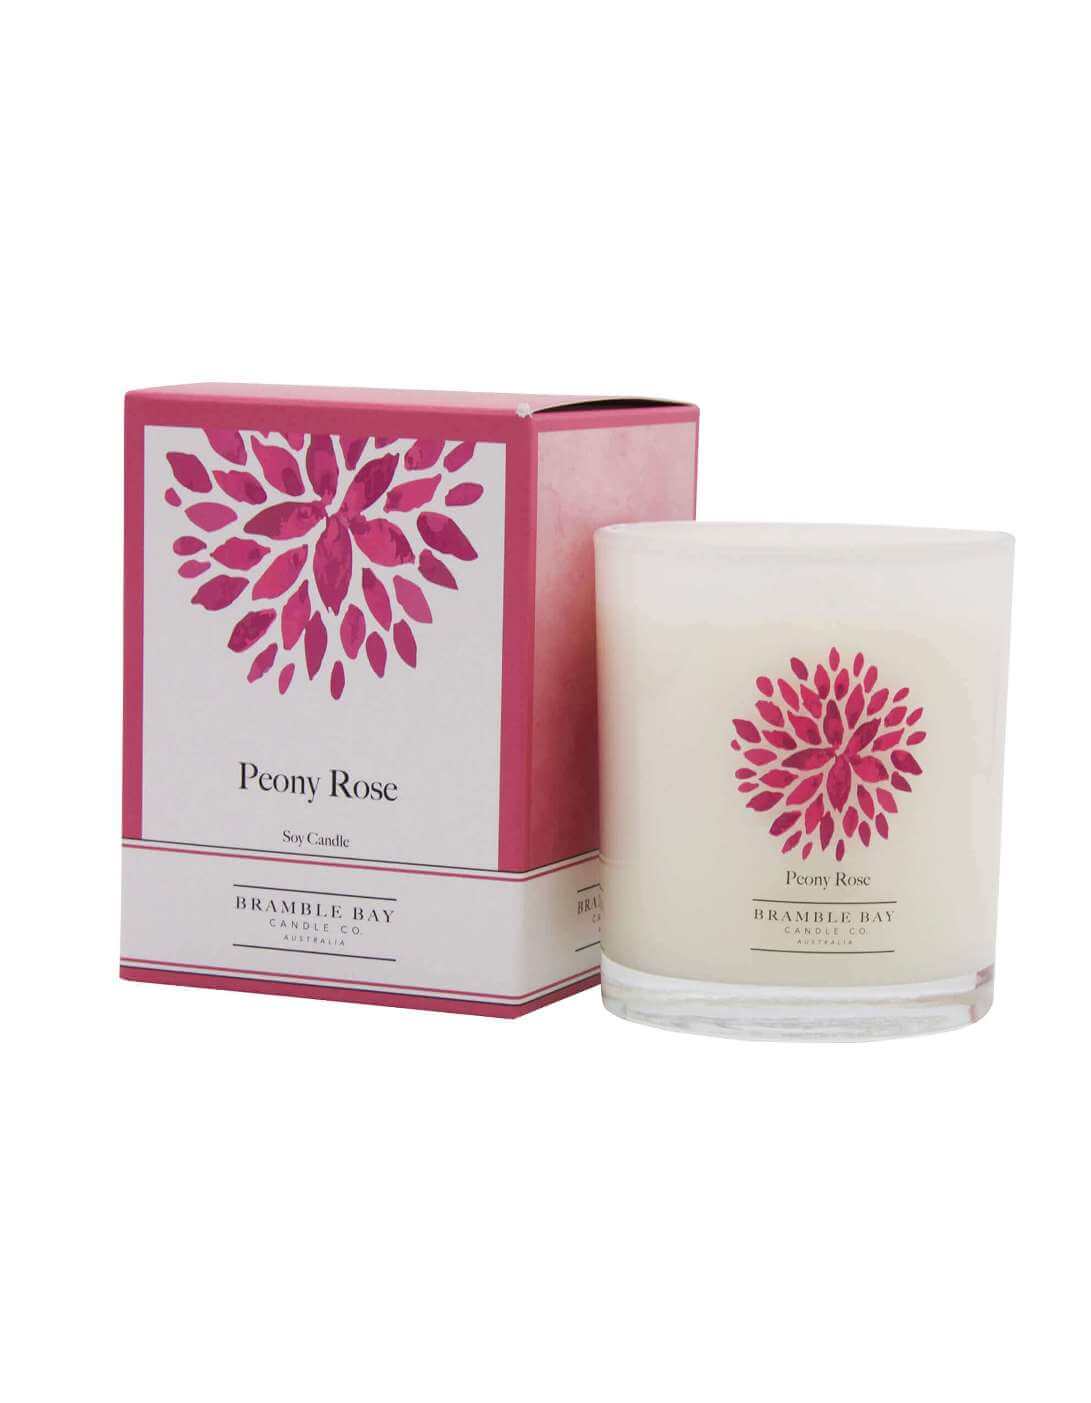 Peony Rose - triple scented candle, hand poured in Australia